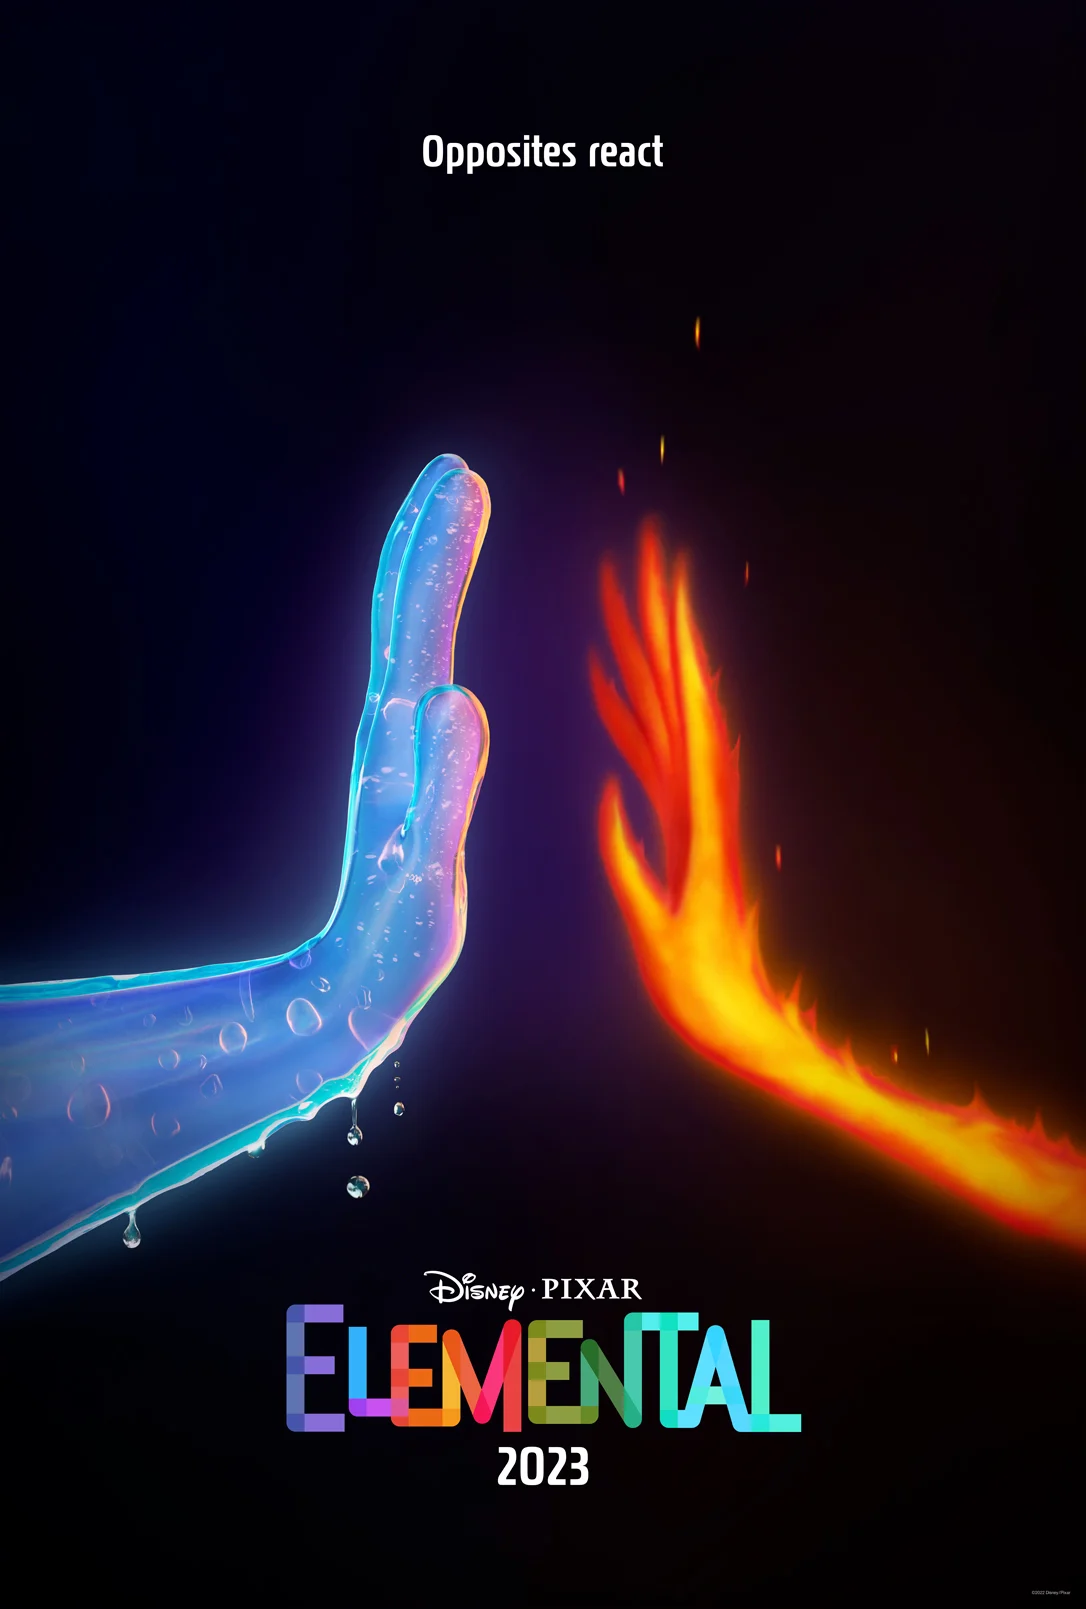 Disney and Pixar Unveil a First Look at Their Next Movie: 'Elemental